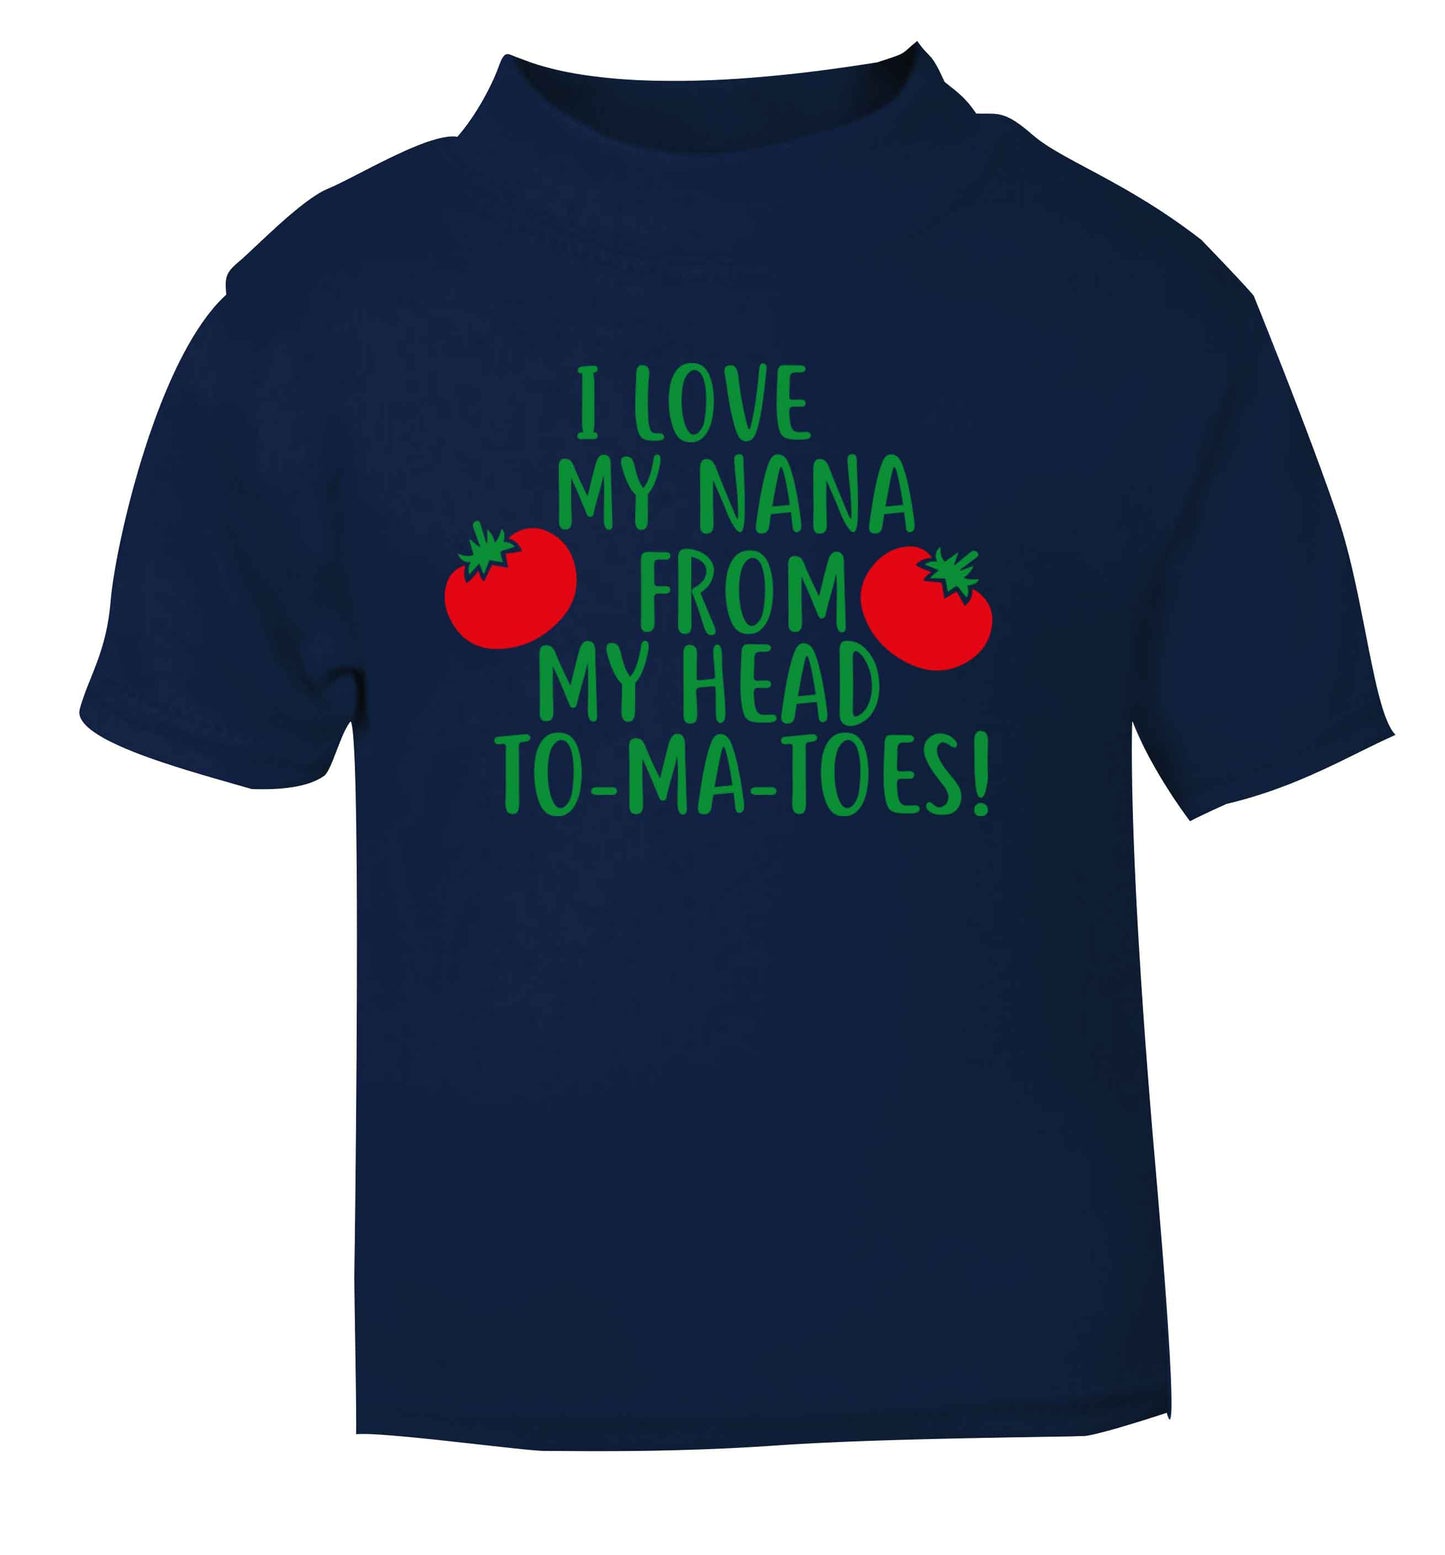 I love my nana from my head to-ma-toes navy Baby Toddler Tshirt 2 Years